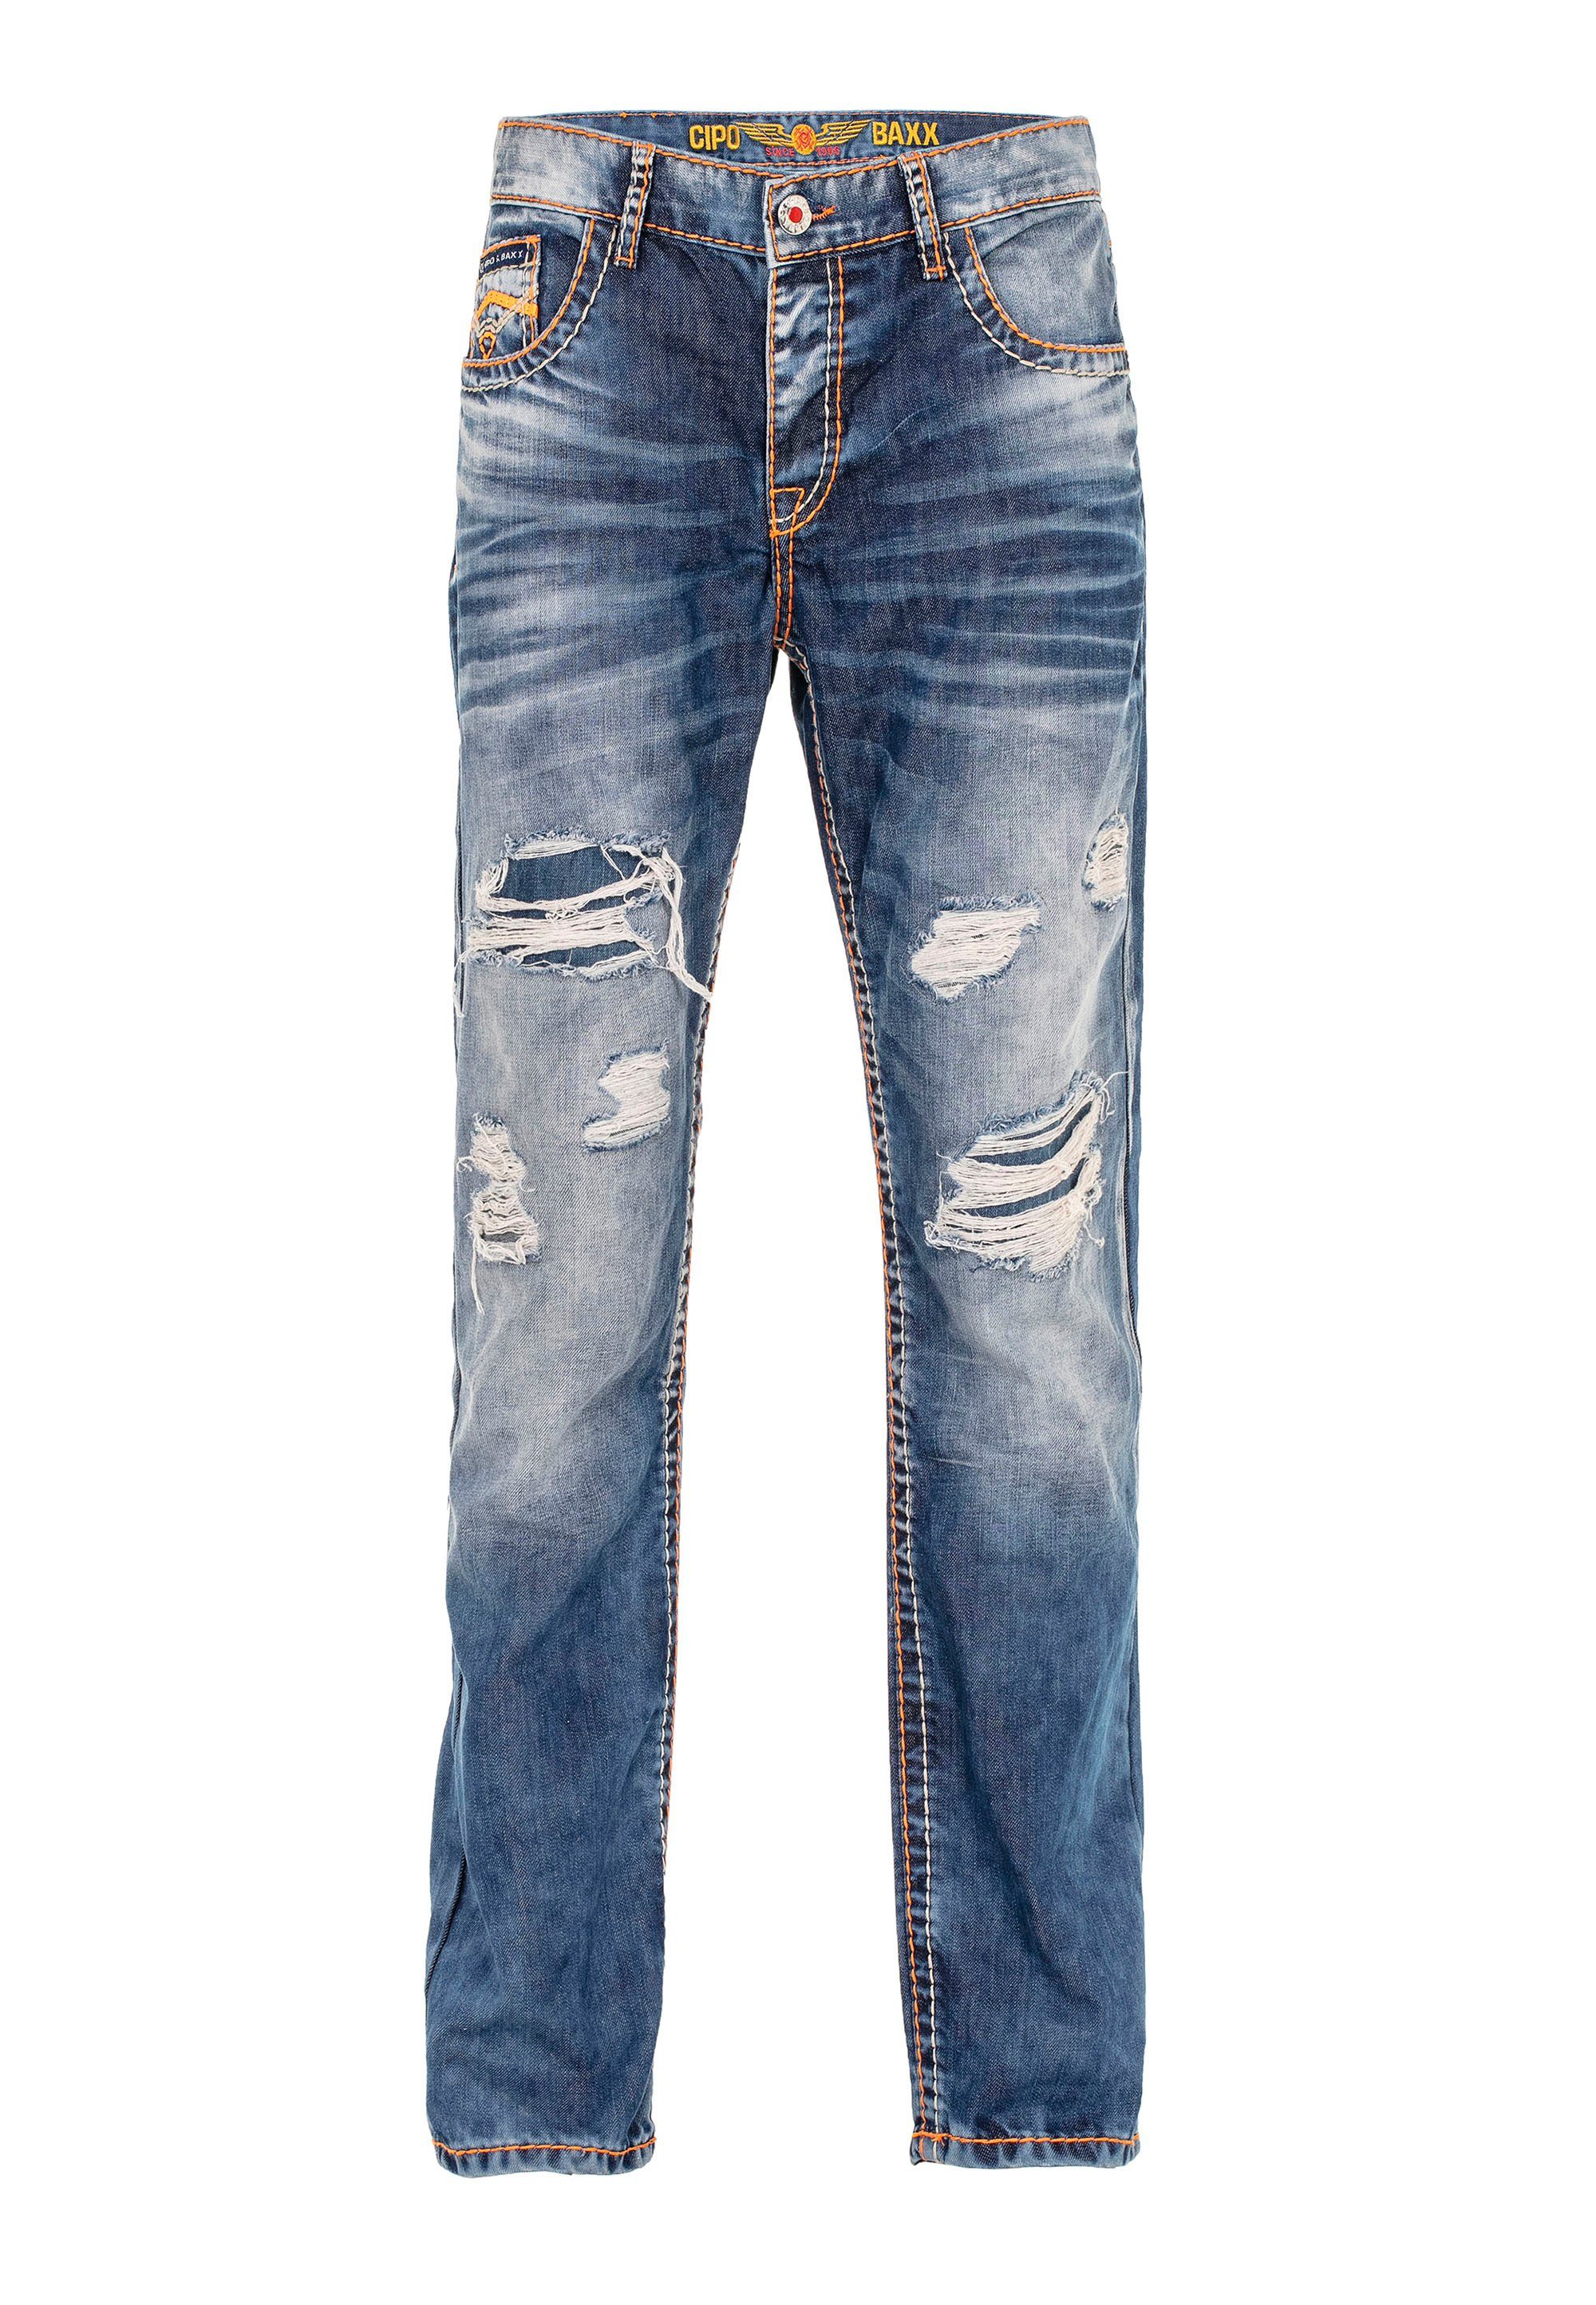 Destroyed-Look Cipo Baxx Bequeme Jeans & im